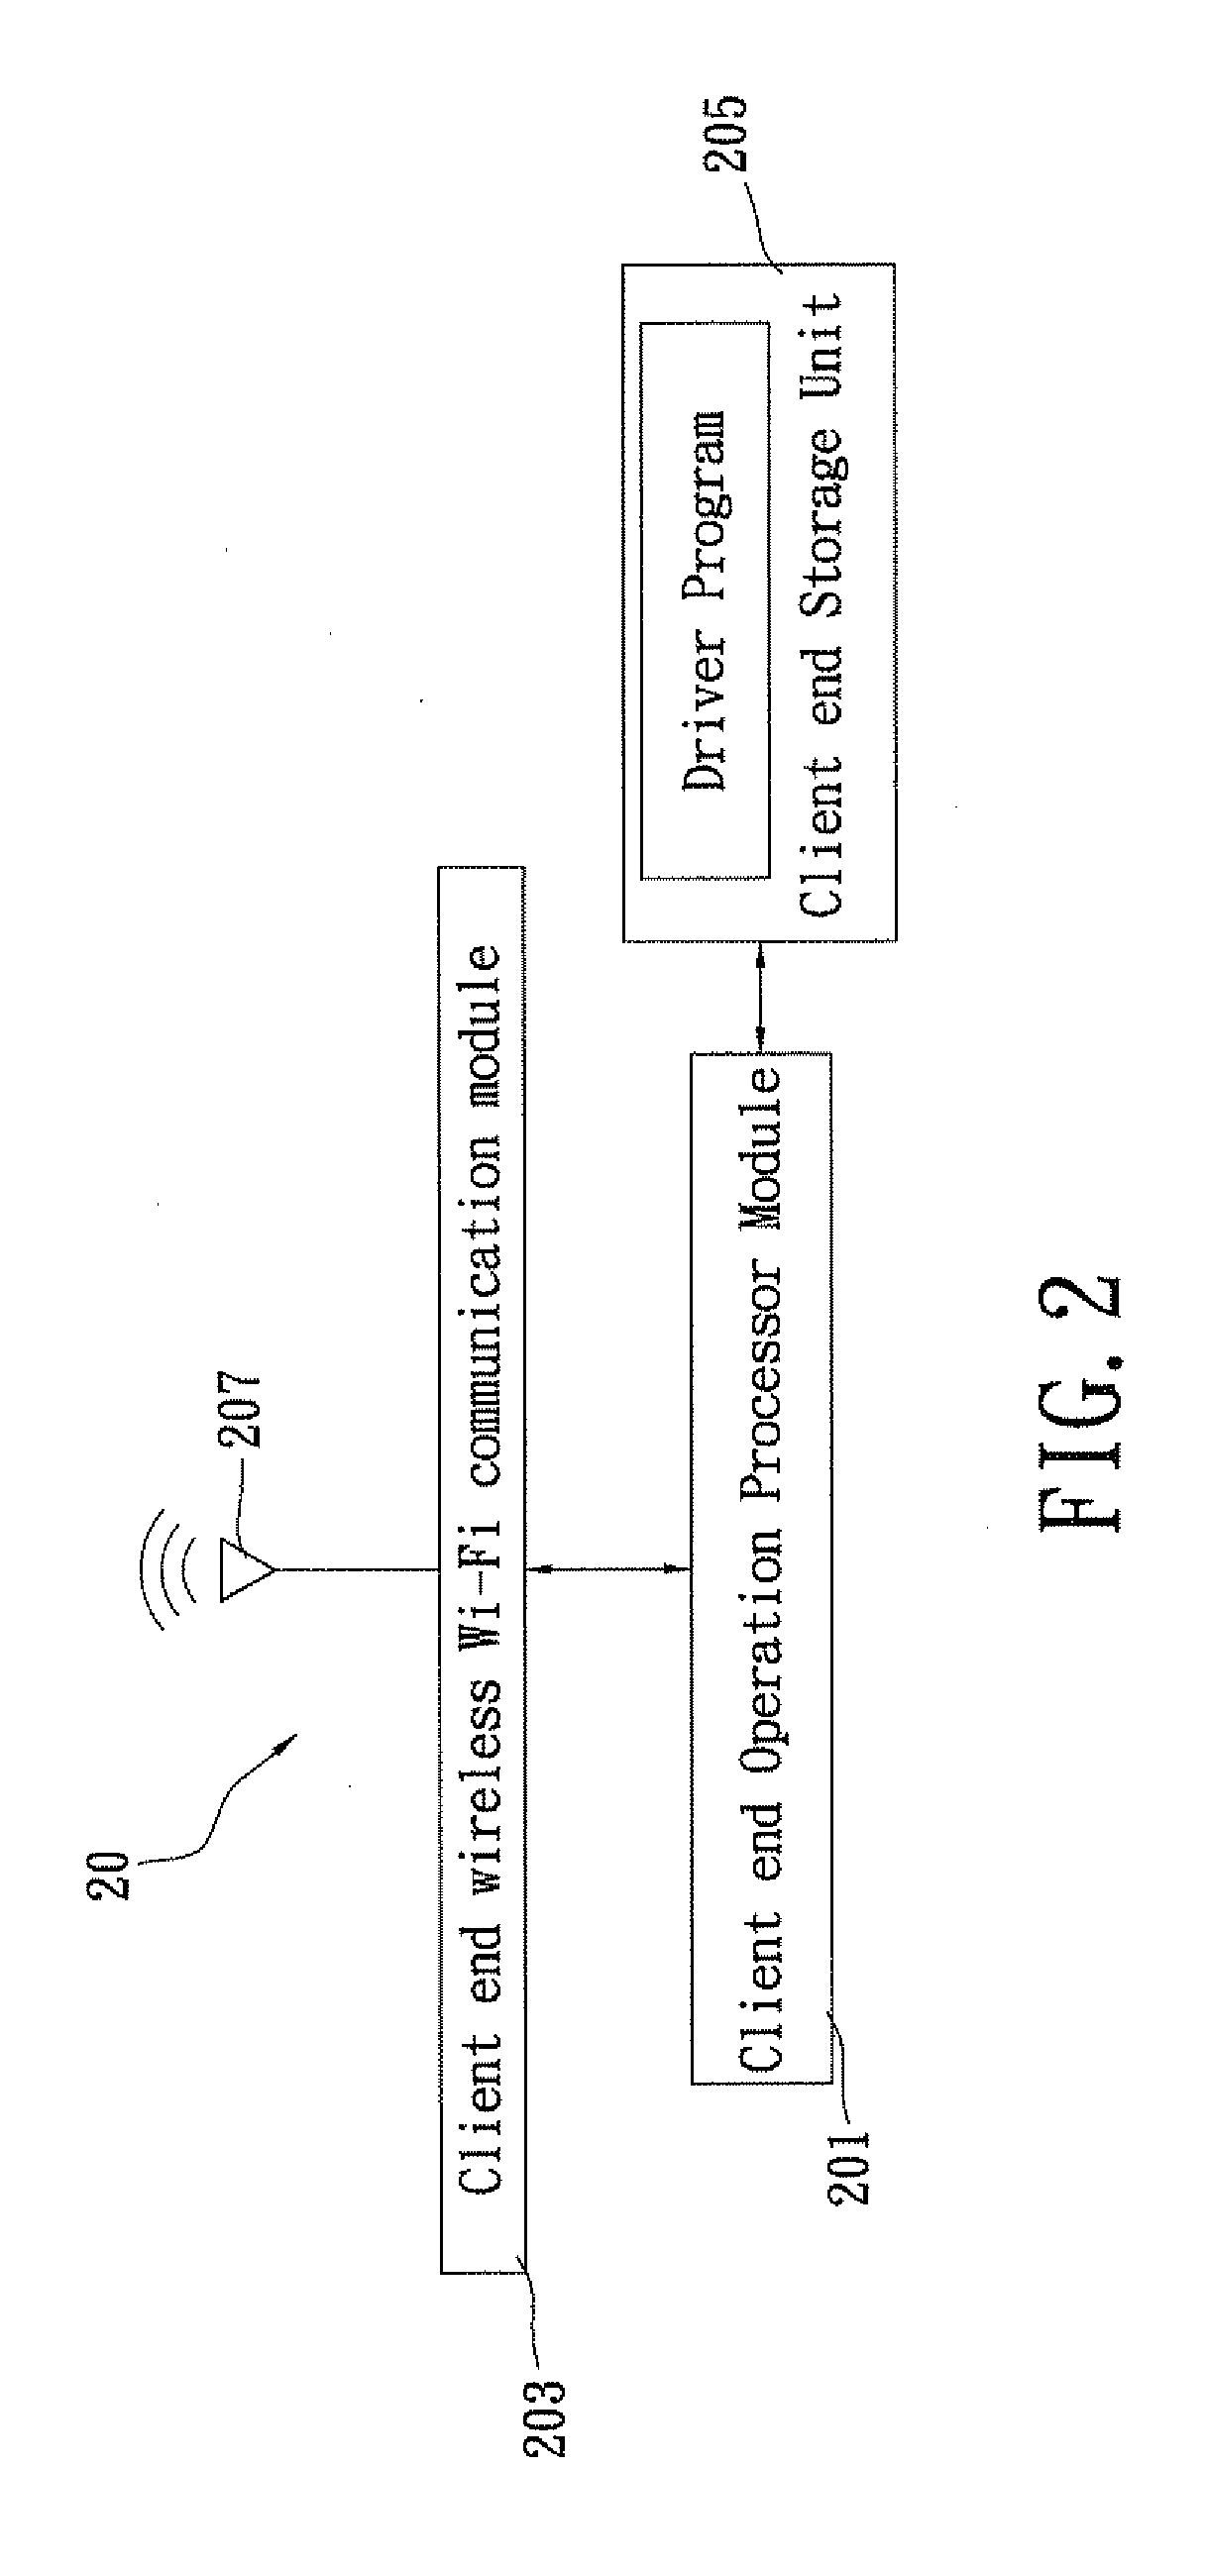 Wireless remote USB hub apparatus and system thereof